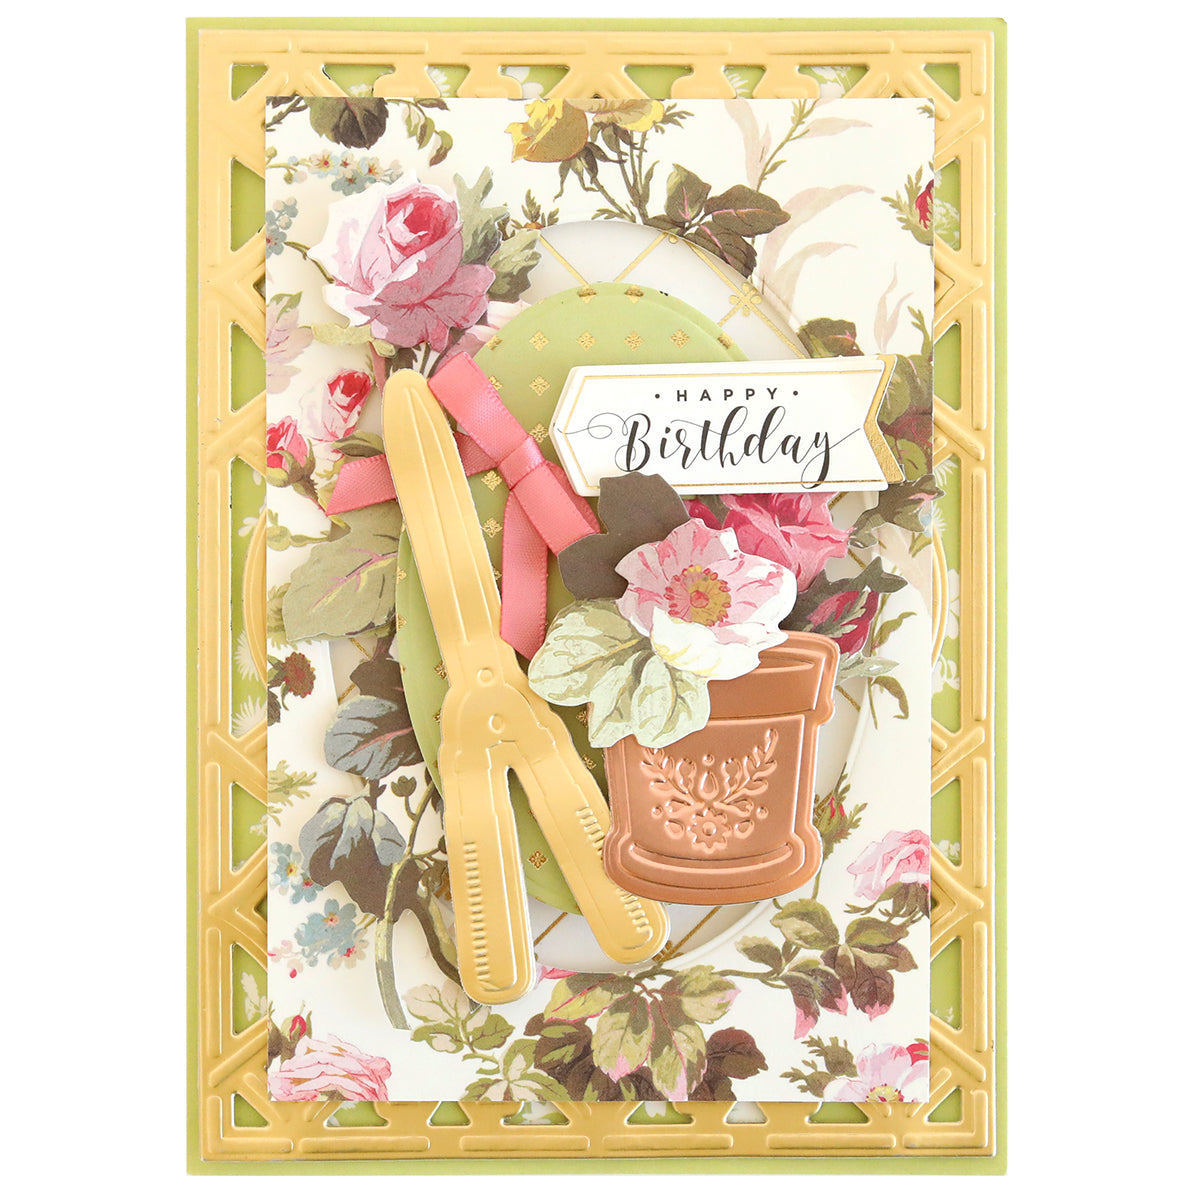 A floral-themed birthday card with a 3D effect, featuring a gardening glove and tool element along with a "happy birthday" banner, adorned with Garden Icons Cut and Emboss Folders embellishments.